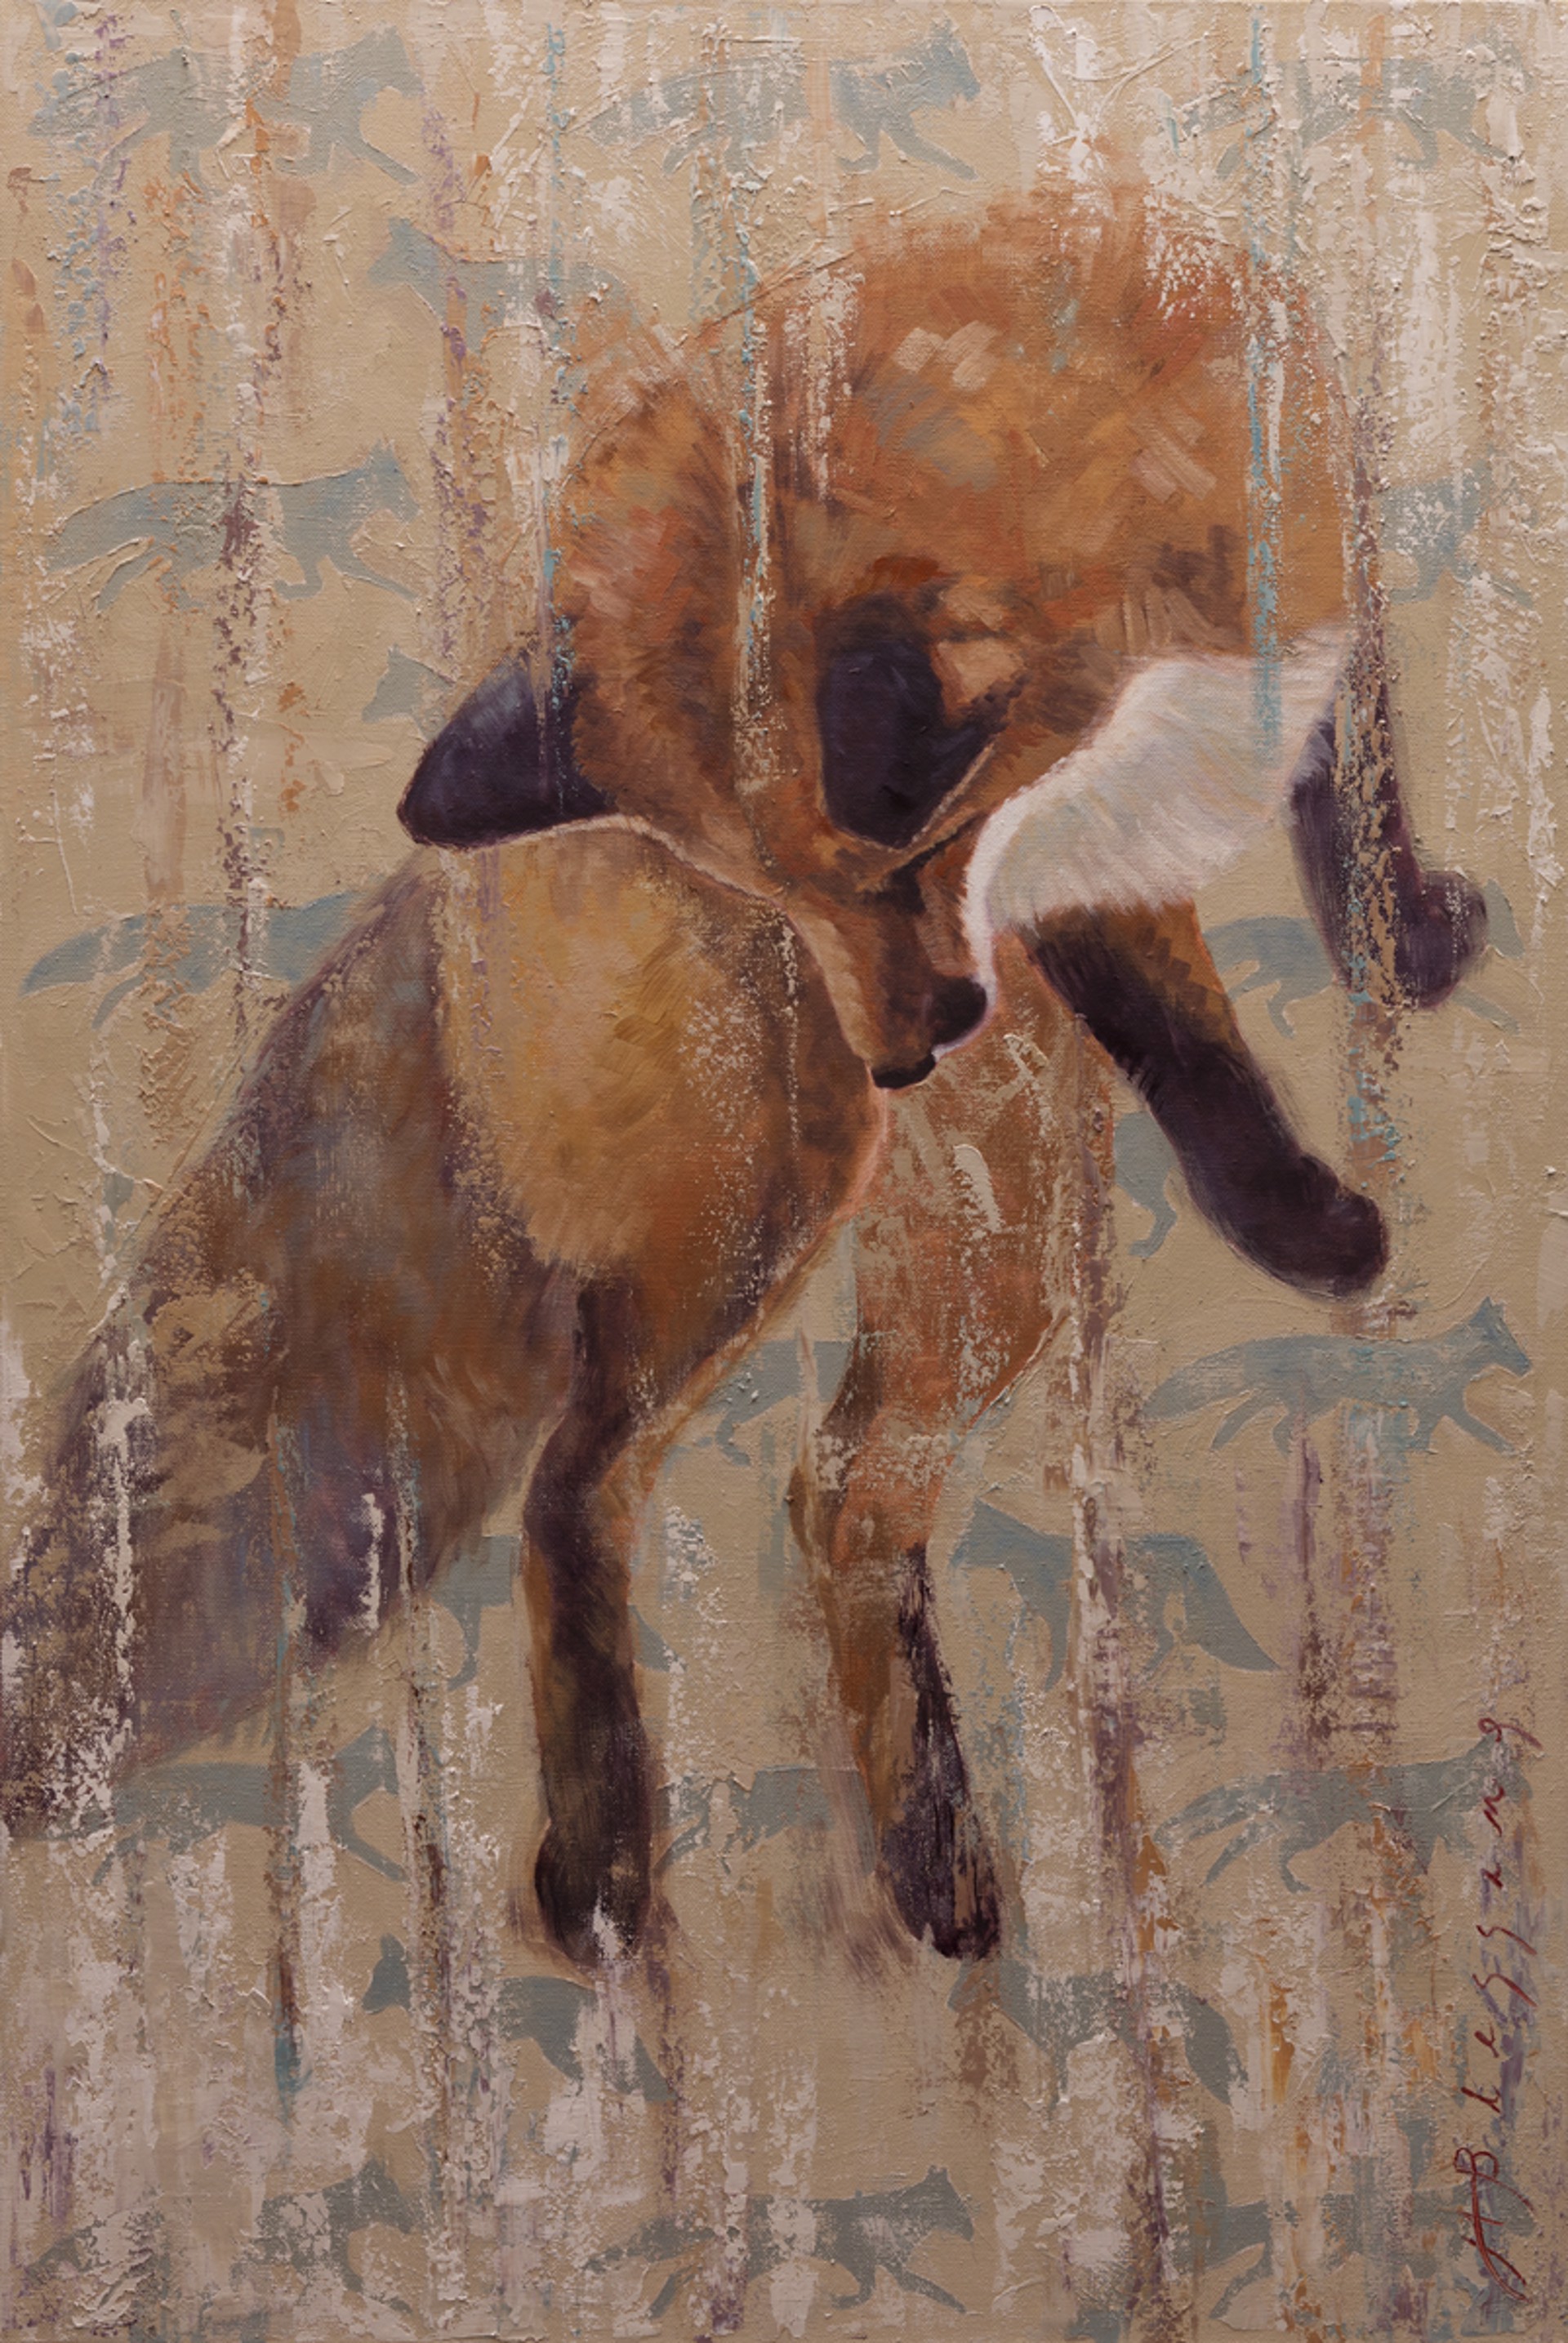 An Oil Painting Of A Red Fox Leaping In The Air With A Contemporary Abstract Tan Background Featuring Rows Of Blue Fox Silhouettes By Meagan Blessing